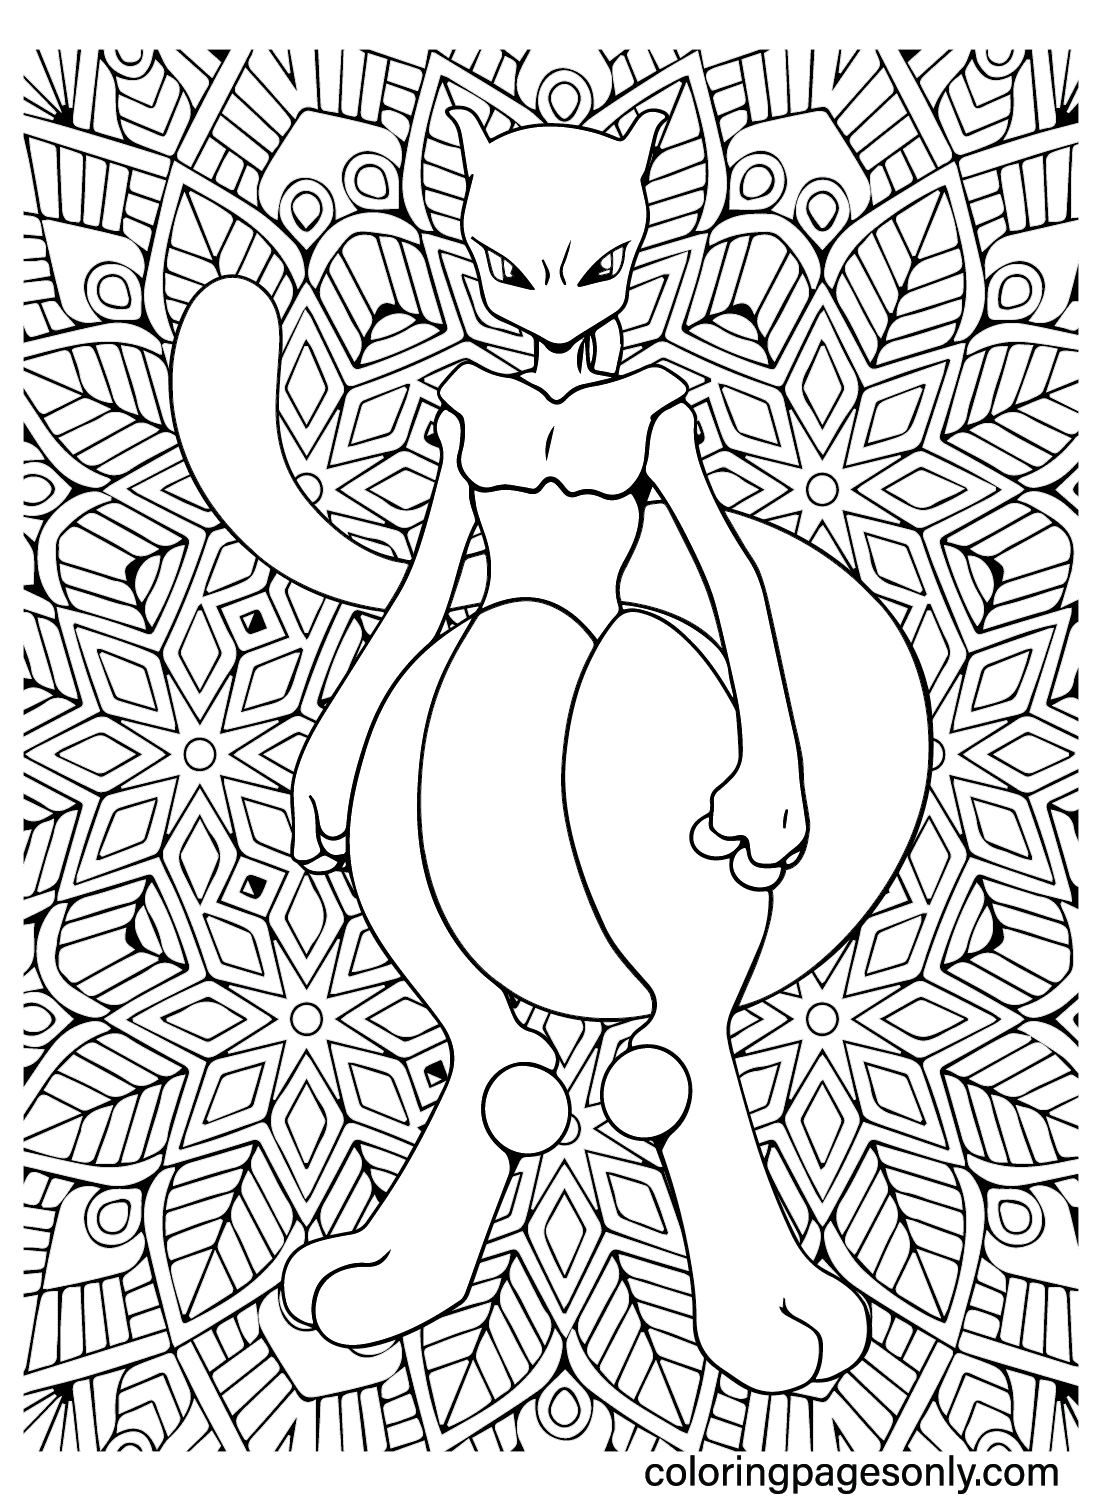 Mewtwo coloring page  Free Printable Coloring Pages